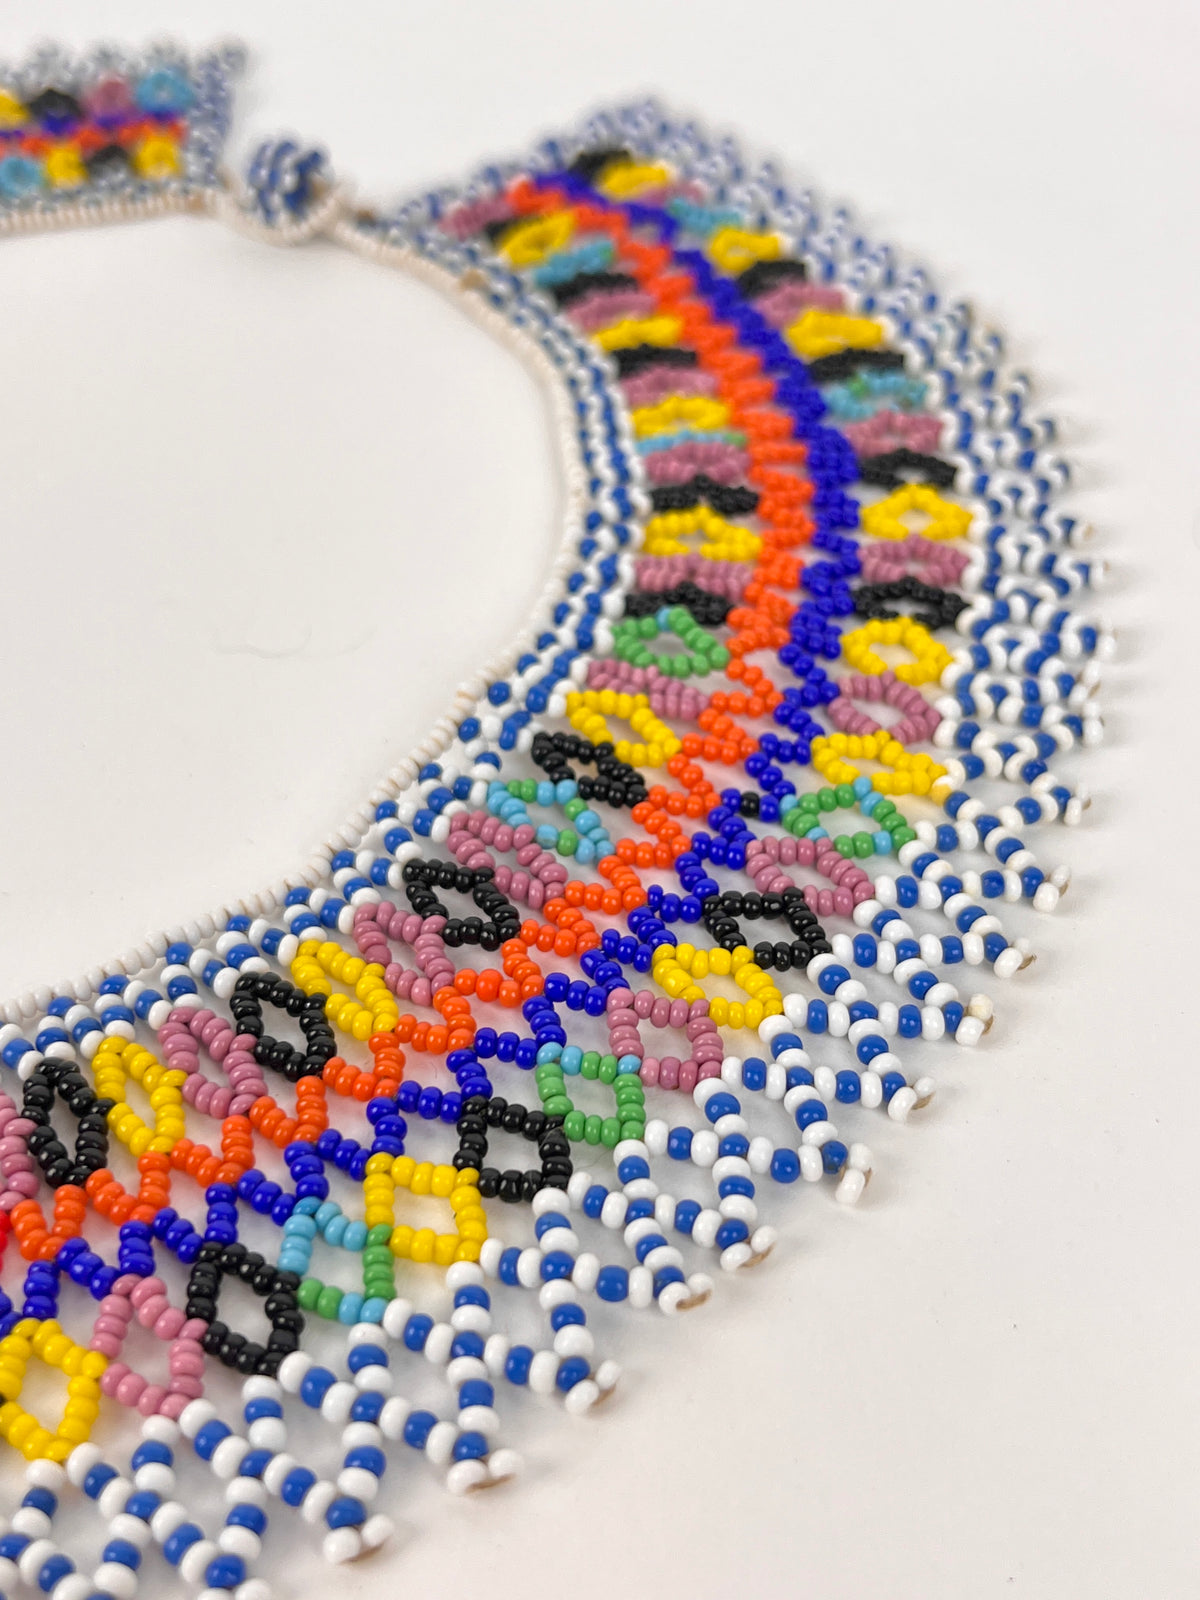 Vintage African Beaded Collar Necklace